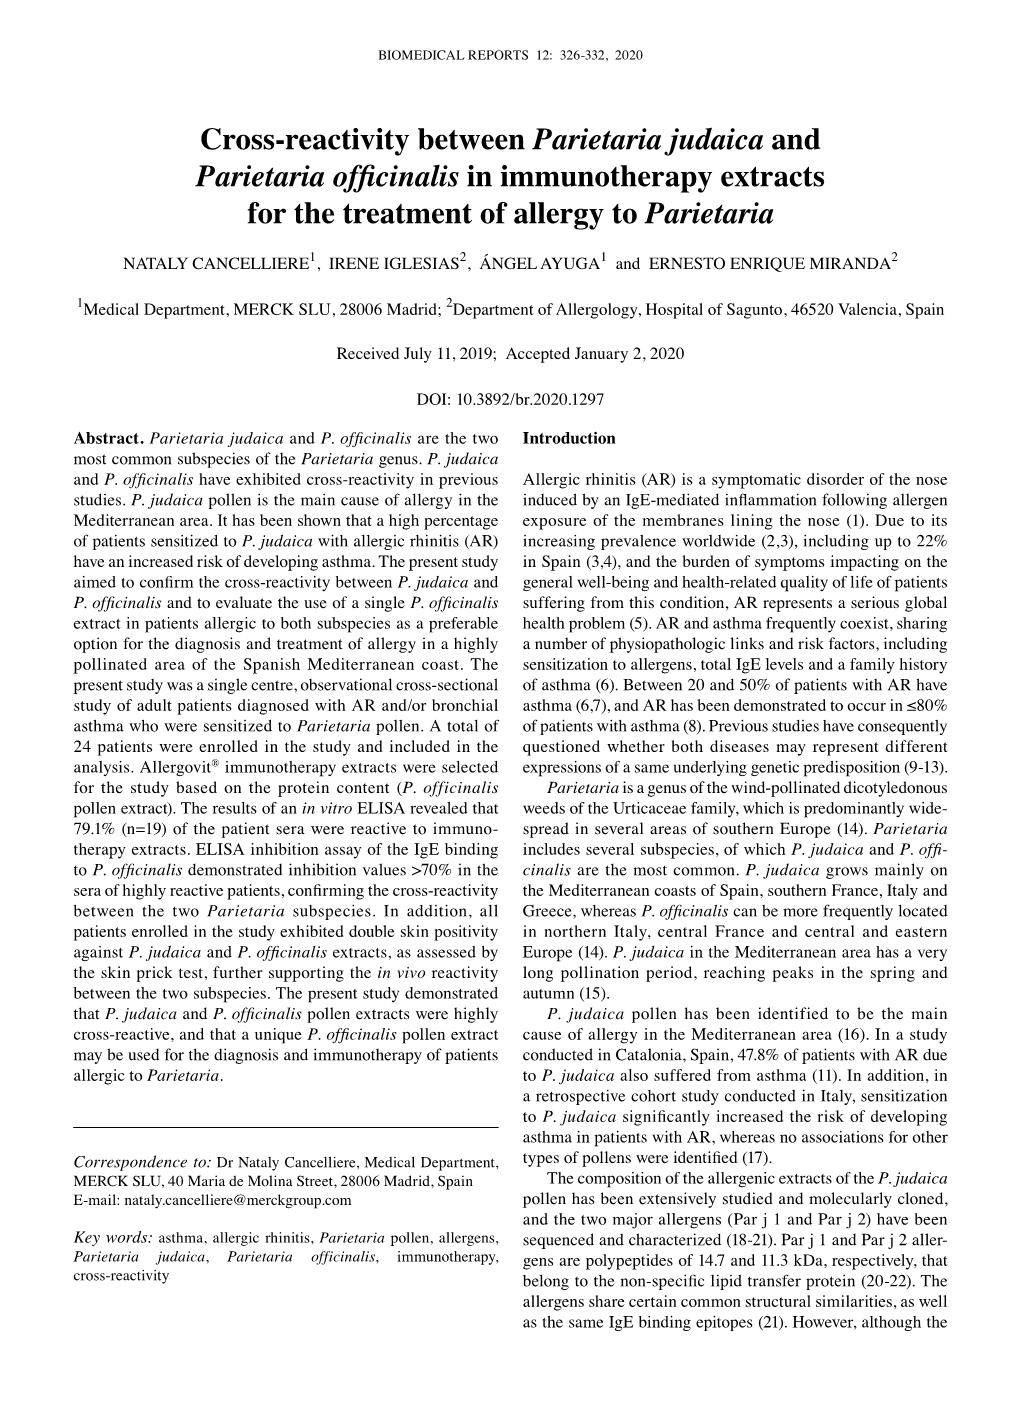 Cross‑Reactivity Between Parietaria Judaica and Parietaria Officinalis in Immunotherapy Extracts for the Treatment of Allergy to Parietaria